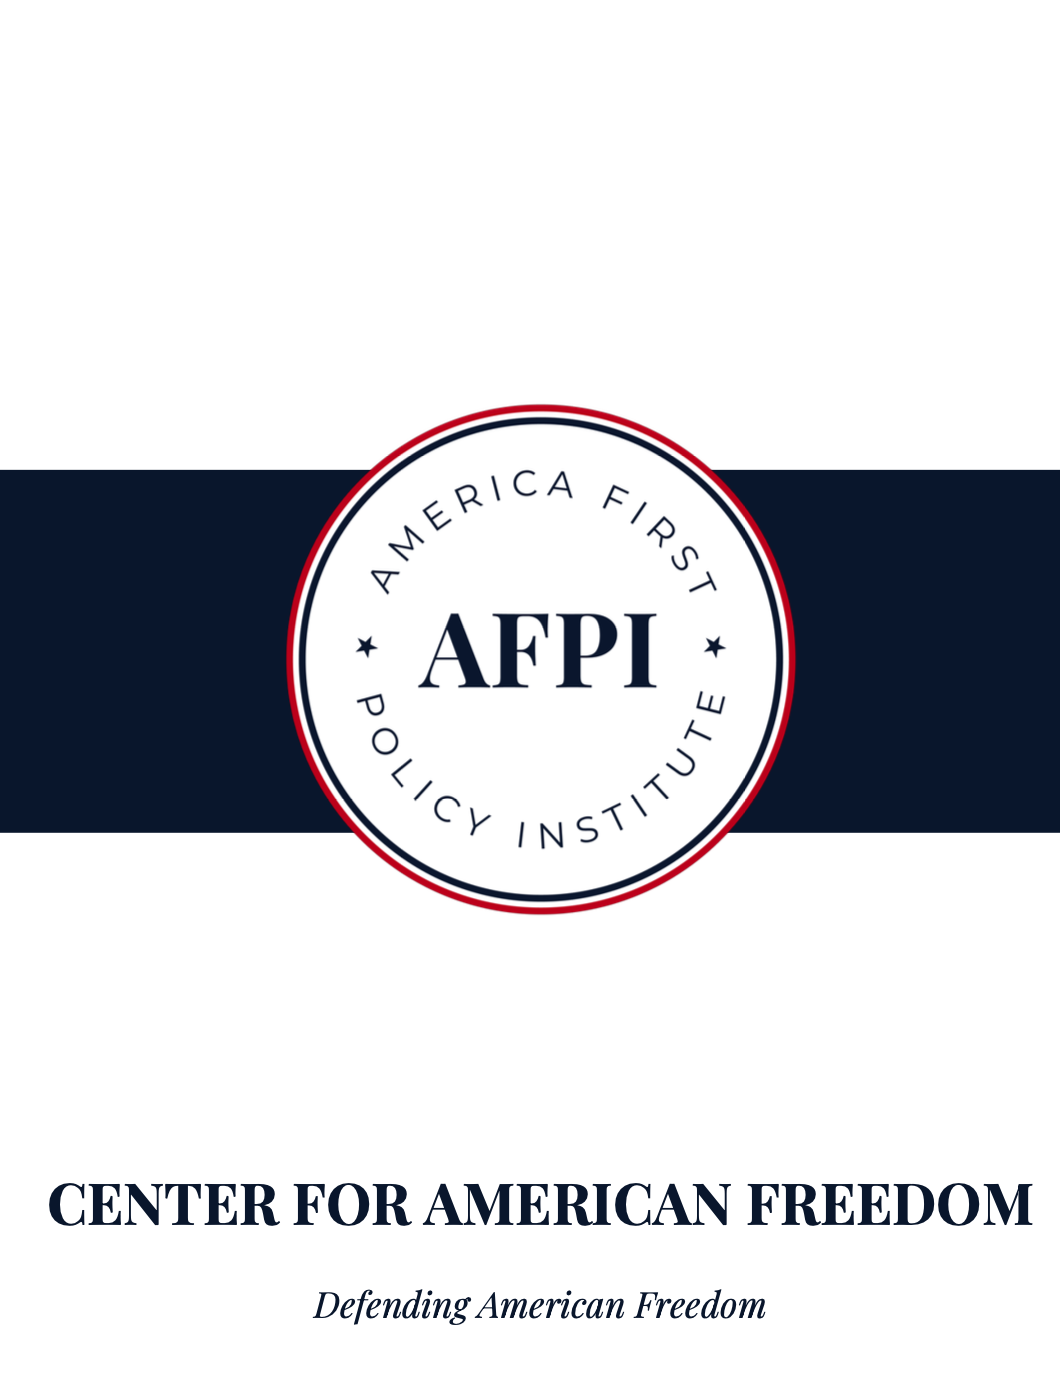 Center for American Freedom Overview | Issues